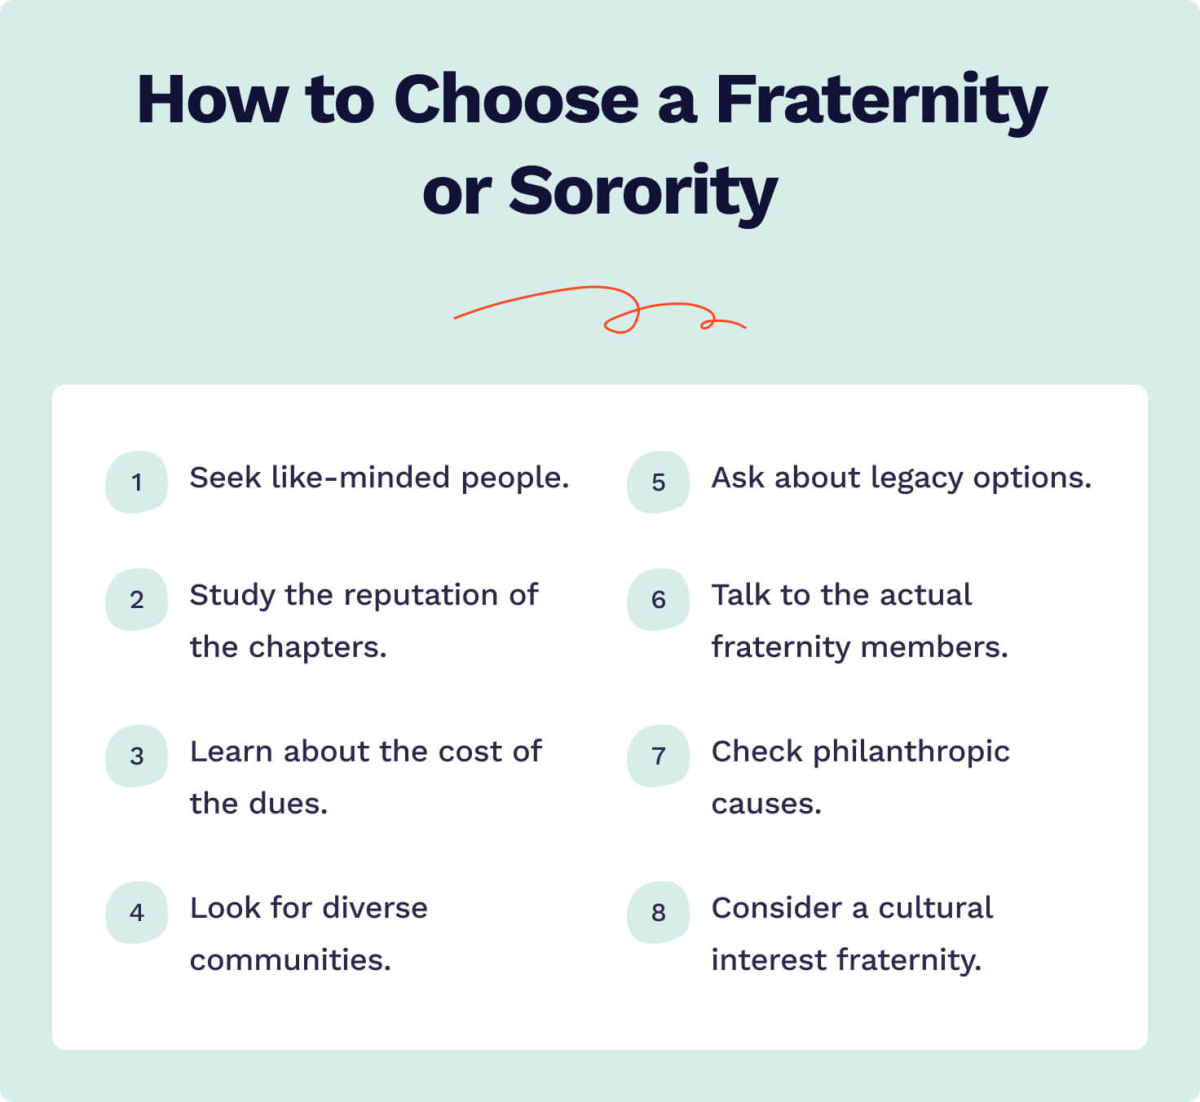 The picture enumerates the steps to choosing a fraternity or sorority.